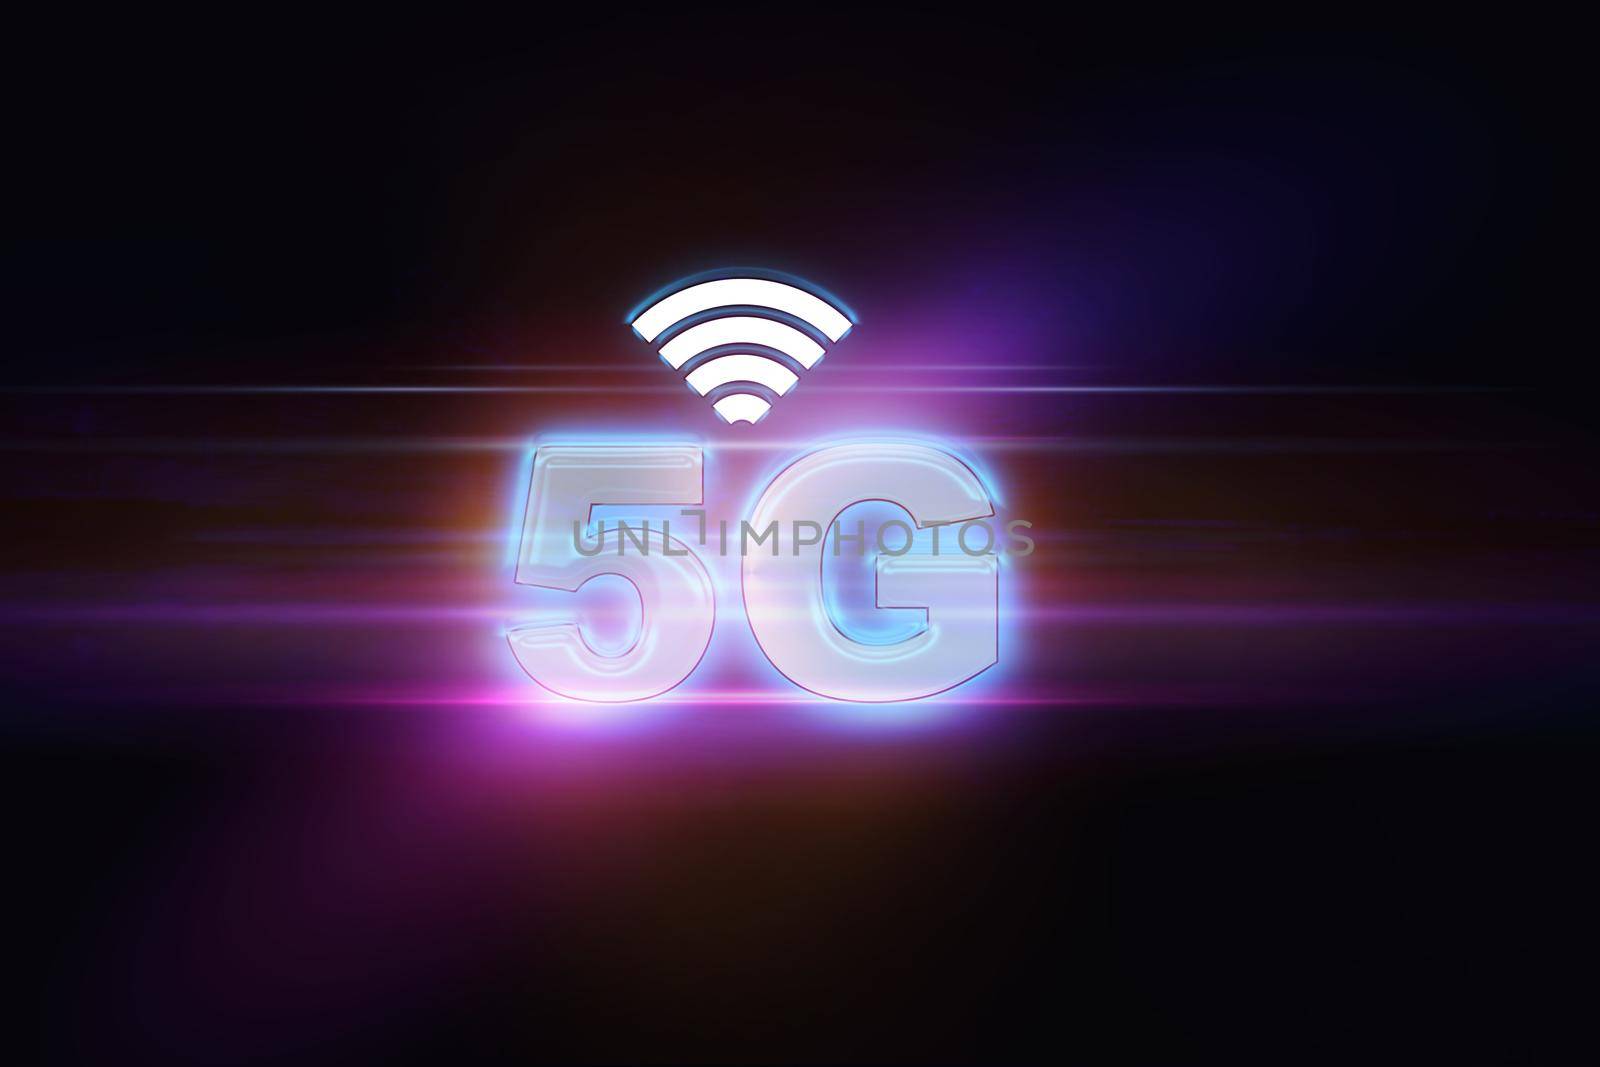 5G Advanced technology background by Wasant